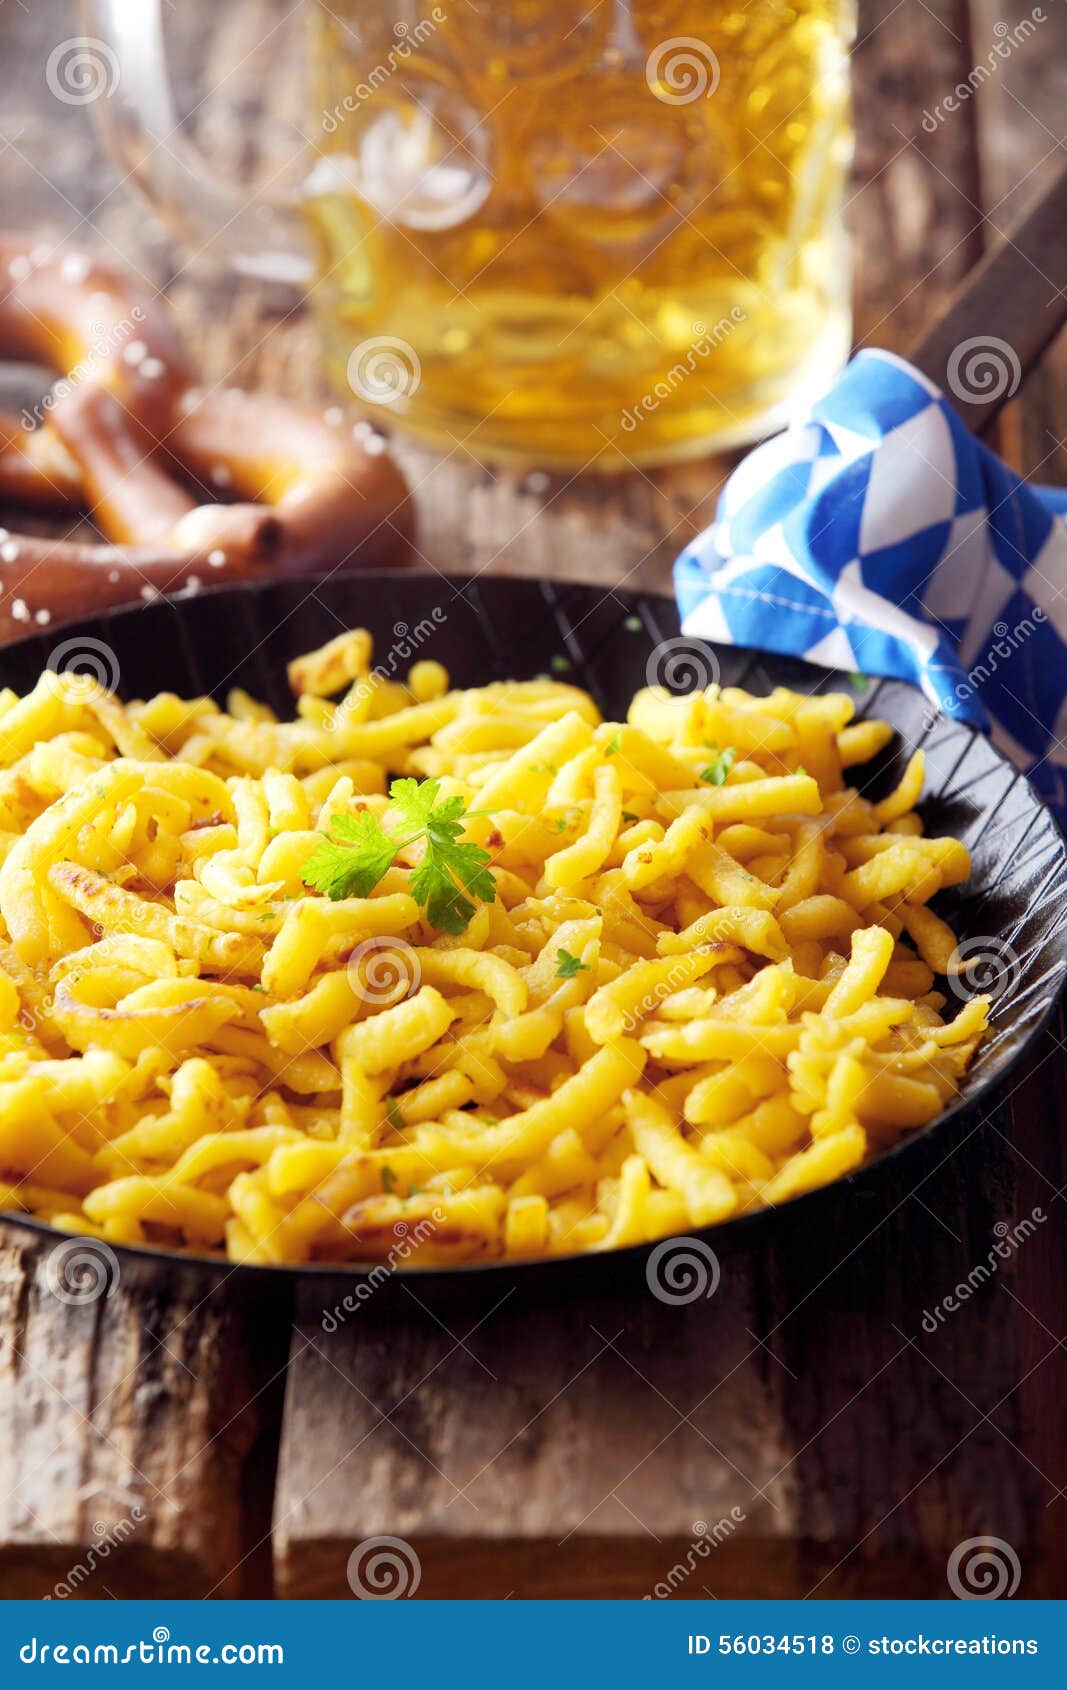 Traditional Bavarian Spaetzle Served with Beer Stock Photo - Image of ...